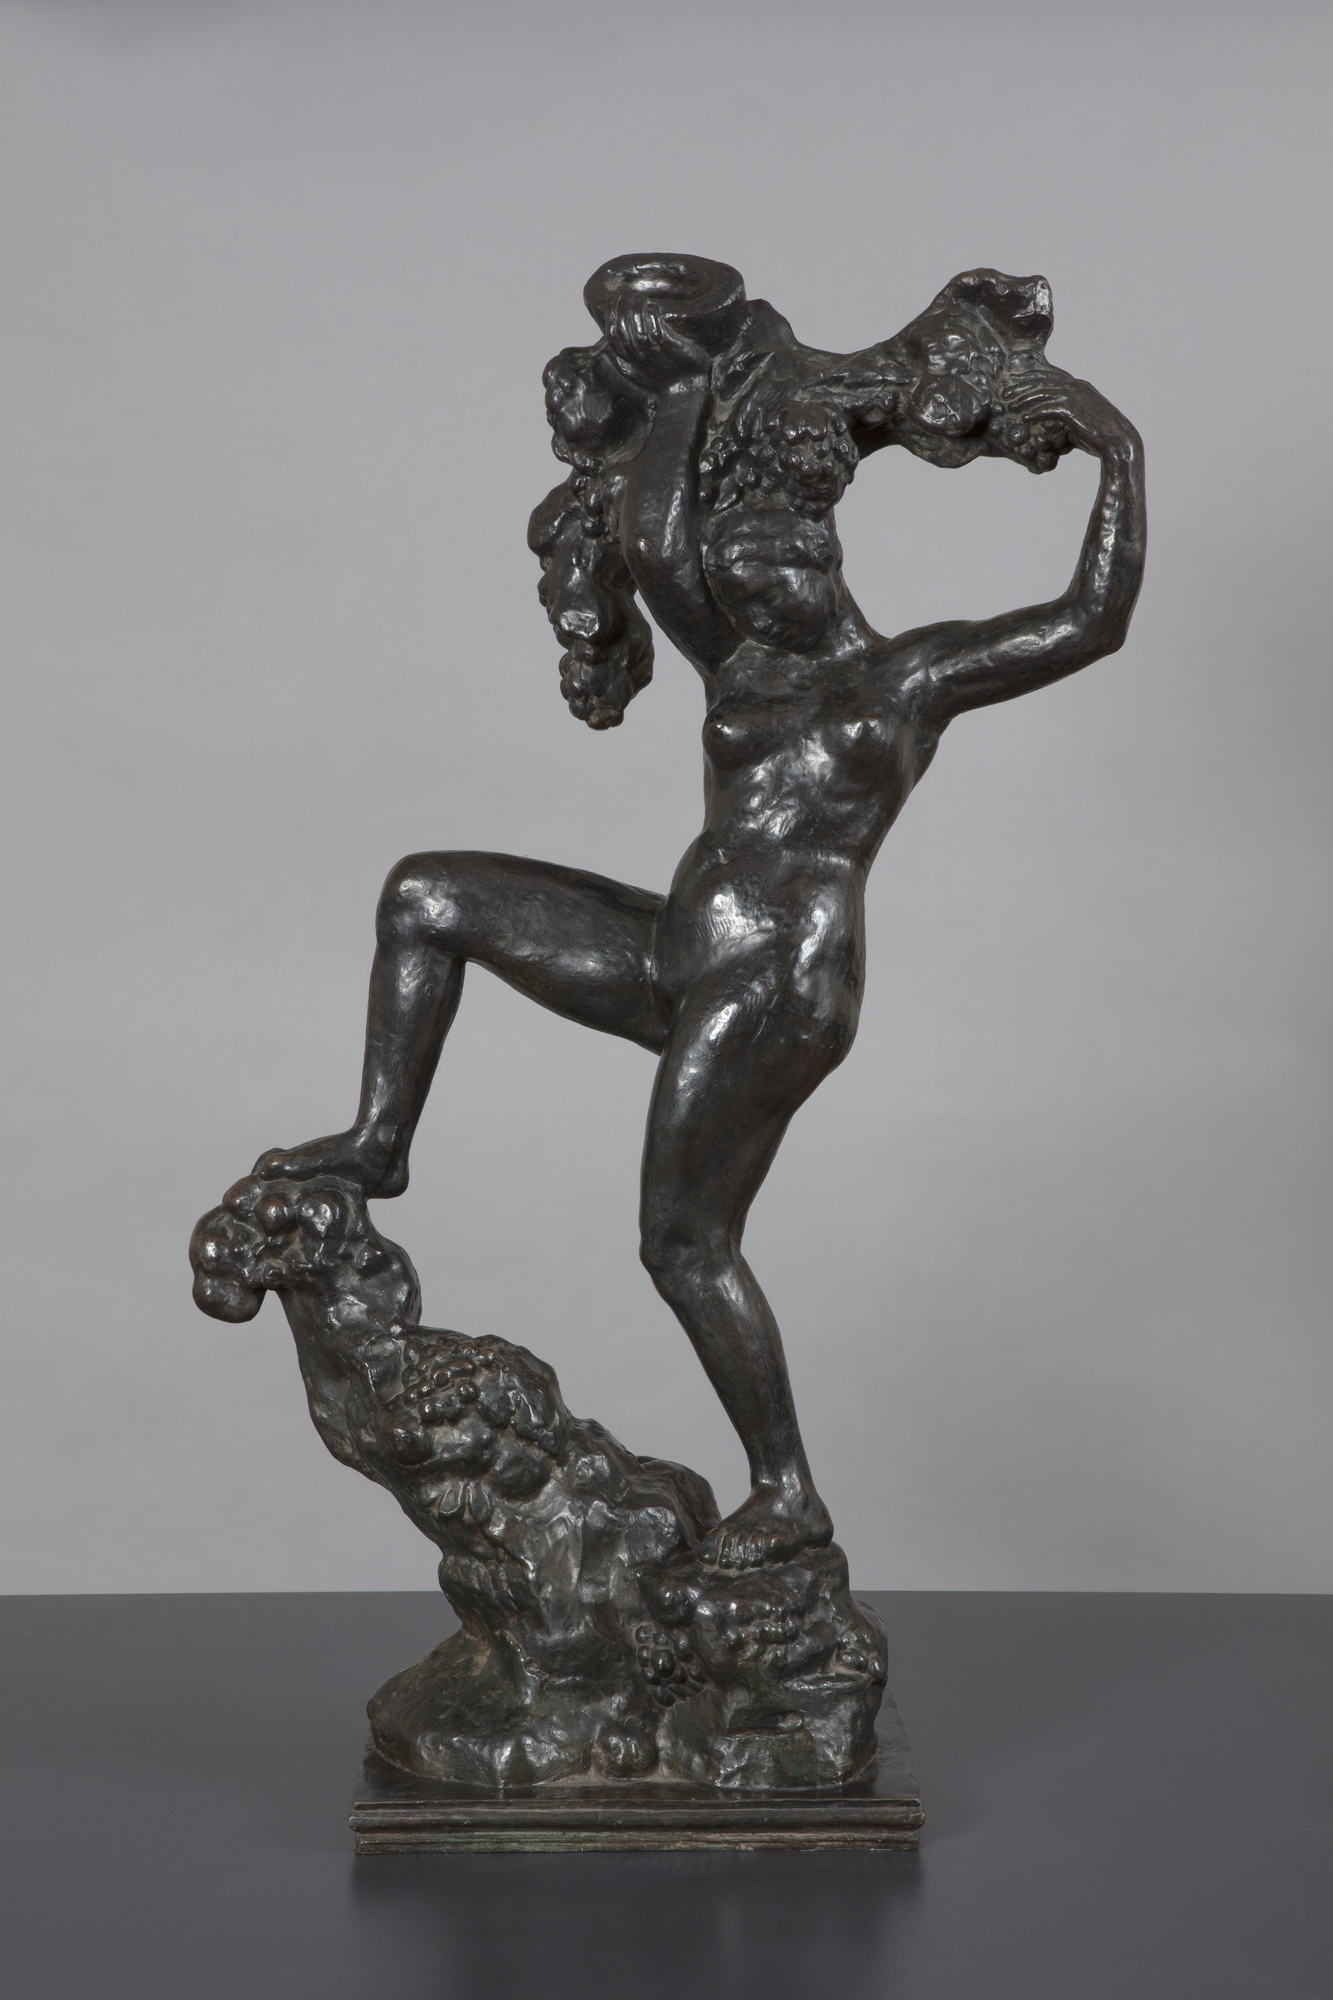 A bronze sculpture of a naked woman balancing on a rocky peak with her right leg held high and bent at the knee. Her arms are raised above her head holding a vine with bunches of grapes.